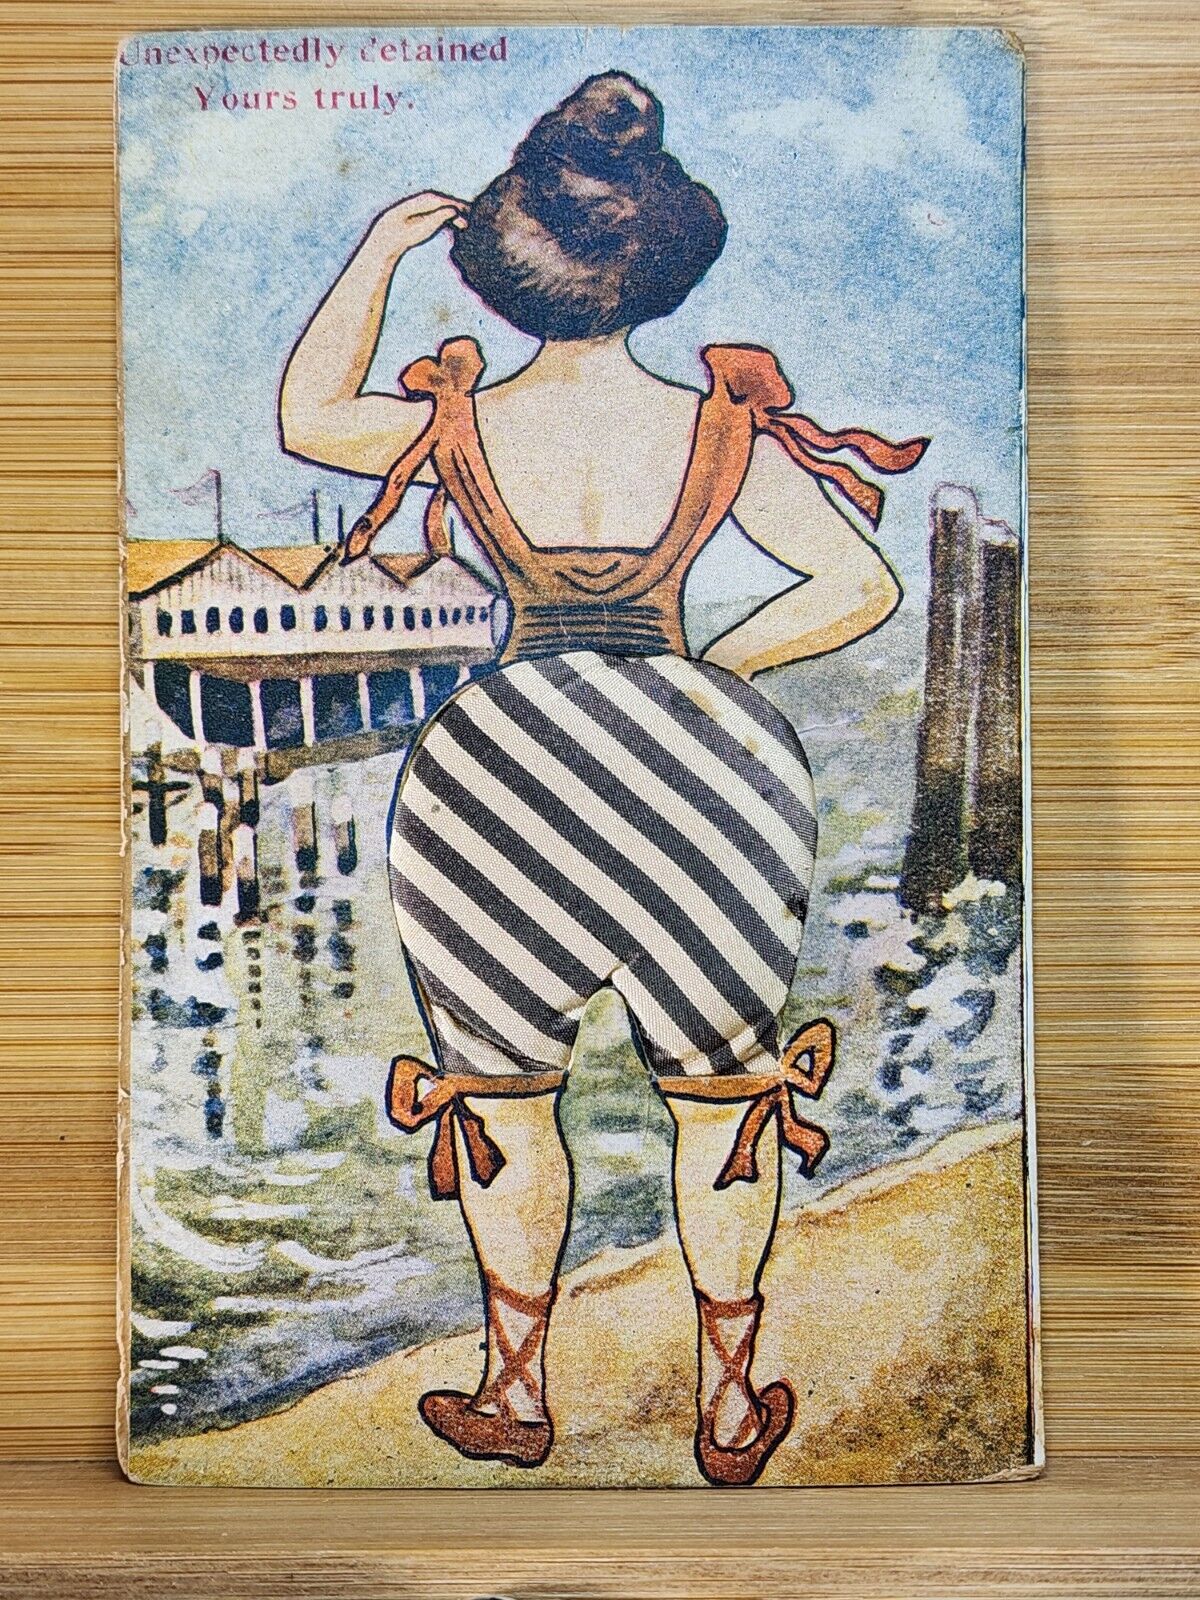 Rare 1910s Pincushion WOMAN ON BEACH Fabric Bathing Suit RISQUE Detained